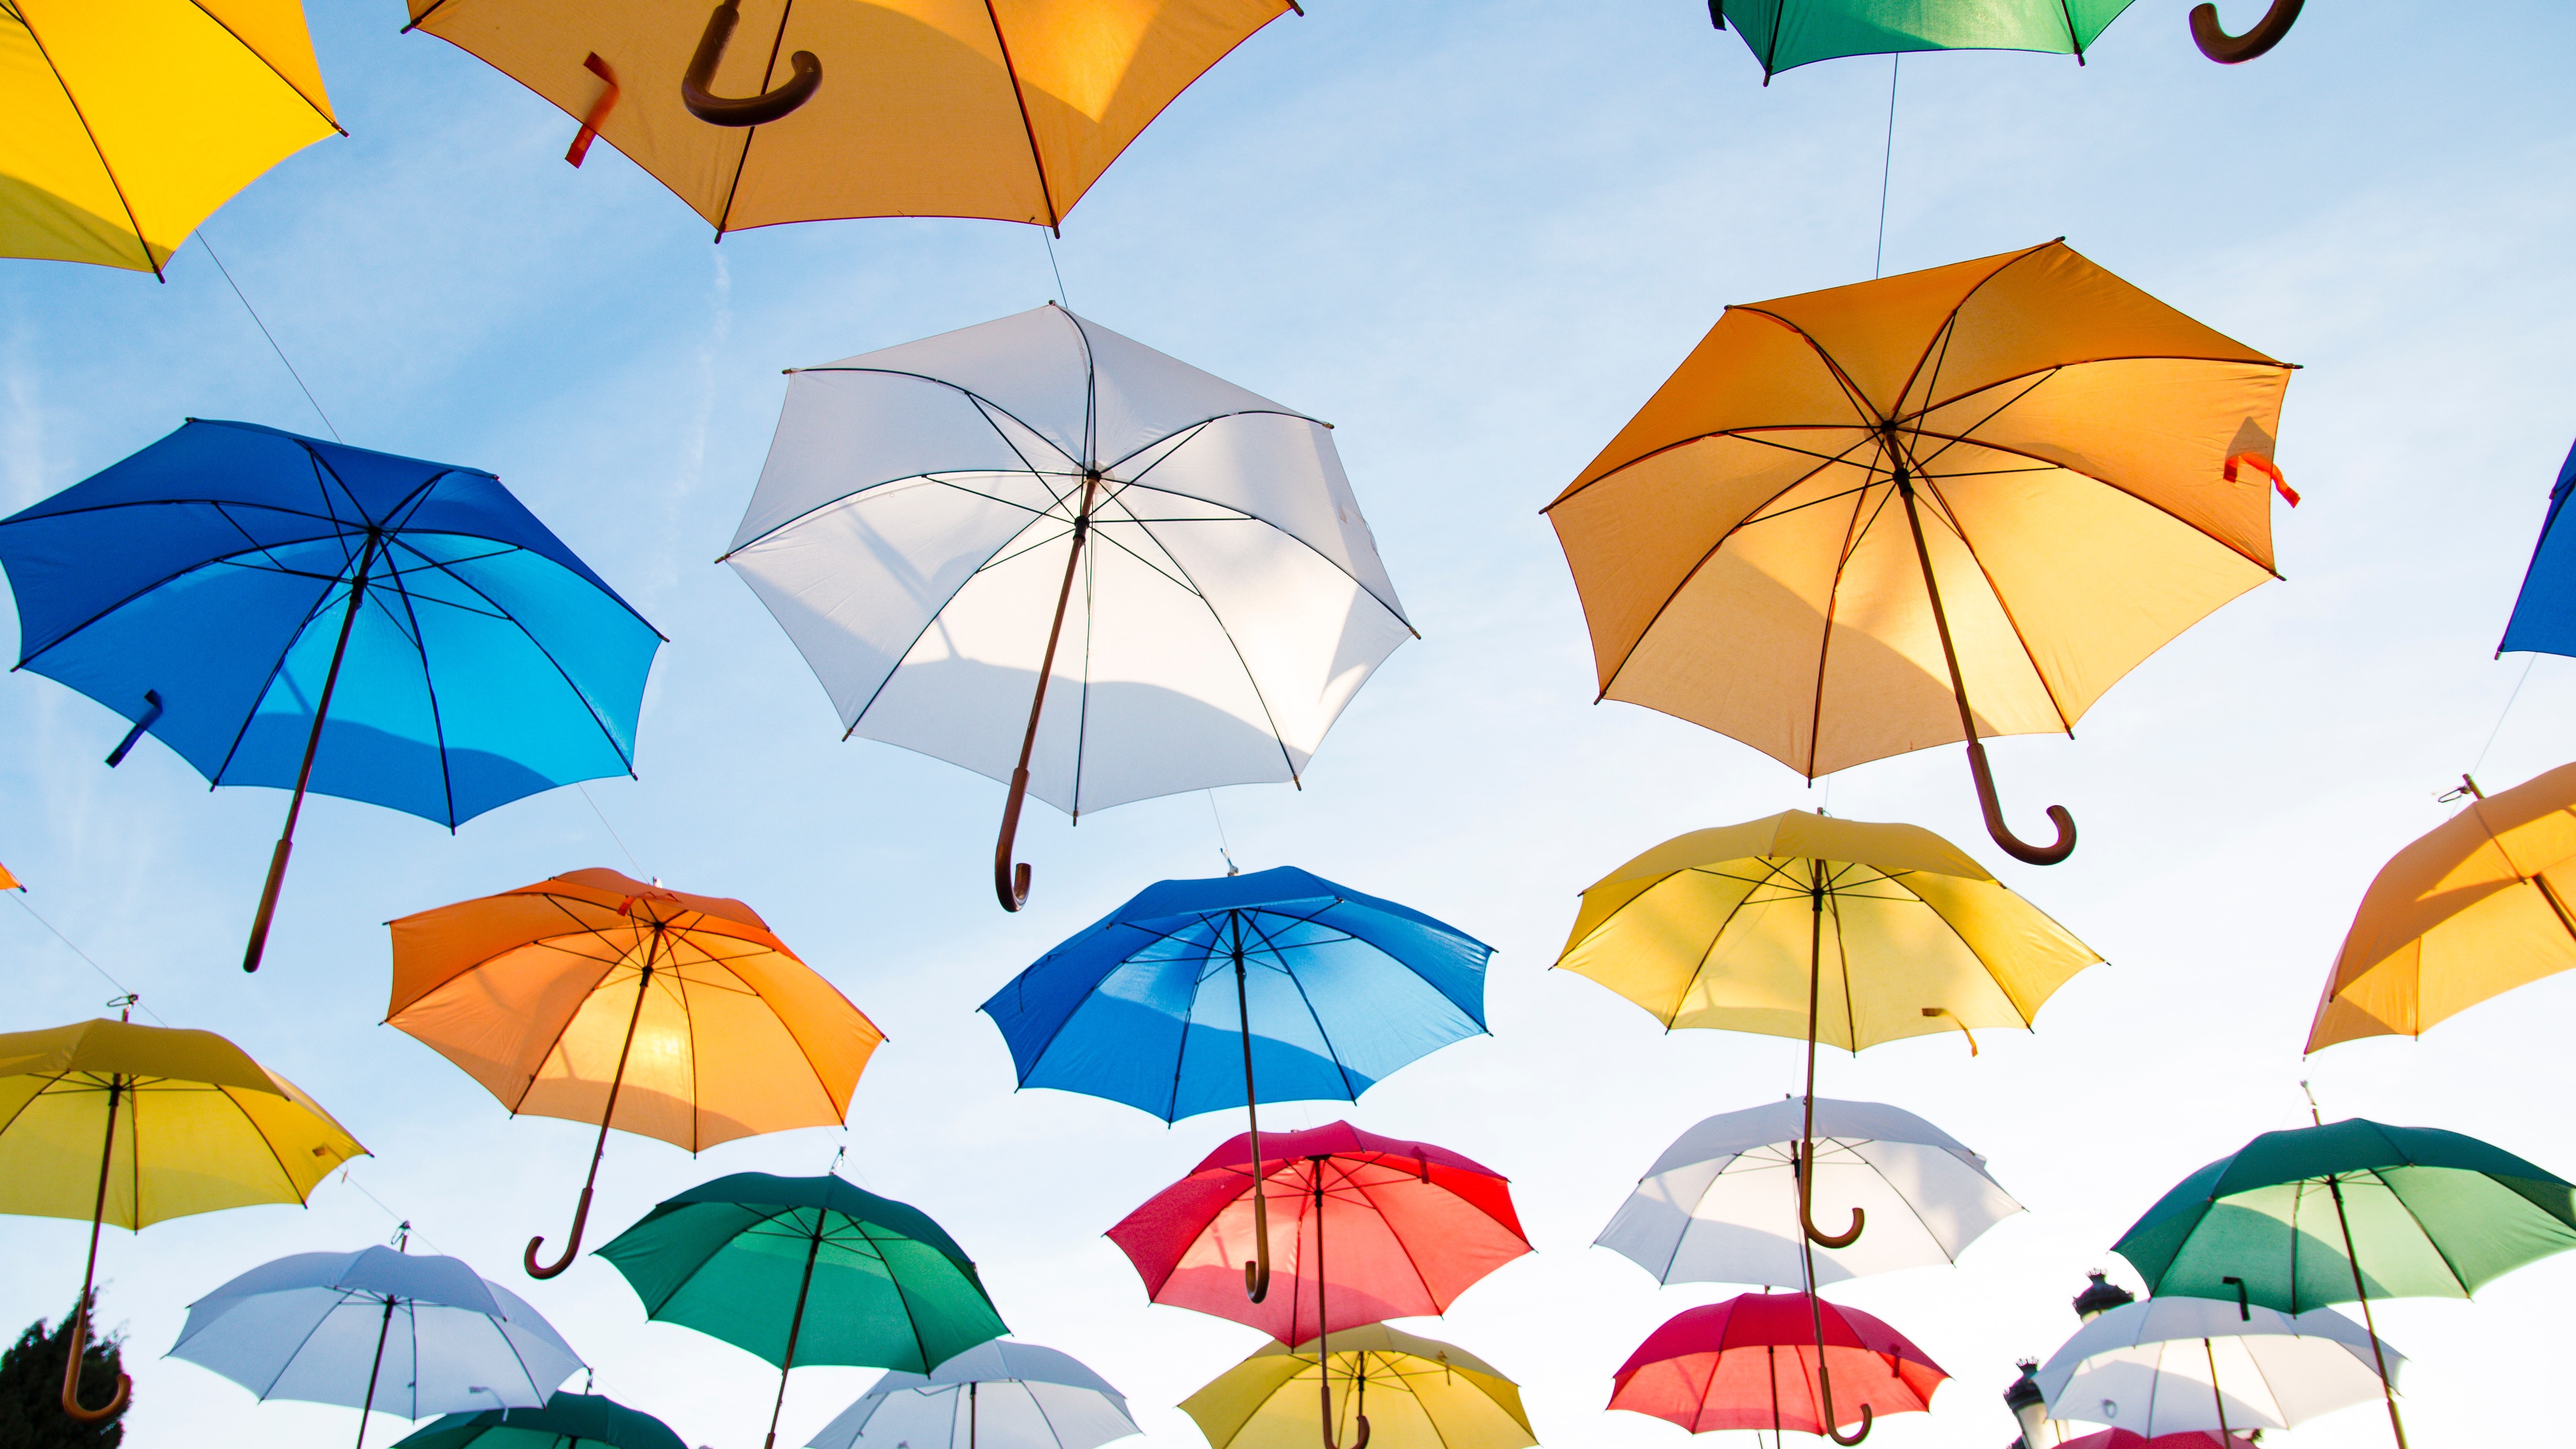 Multi-colored umbrellas float down from the sky. Understand valuation and all your options for protecting your move.